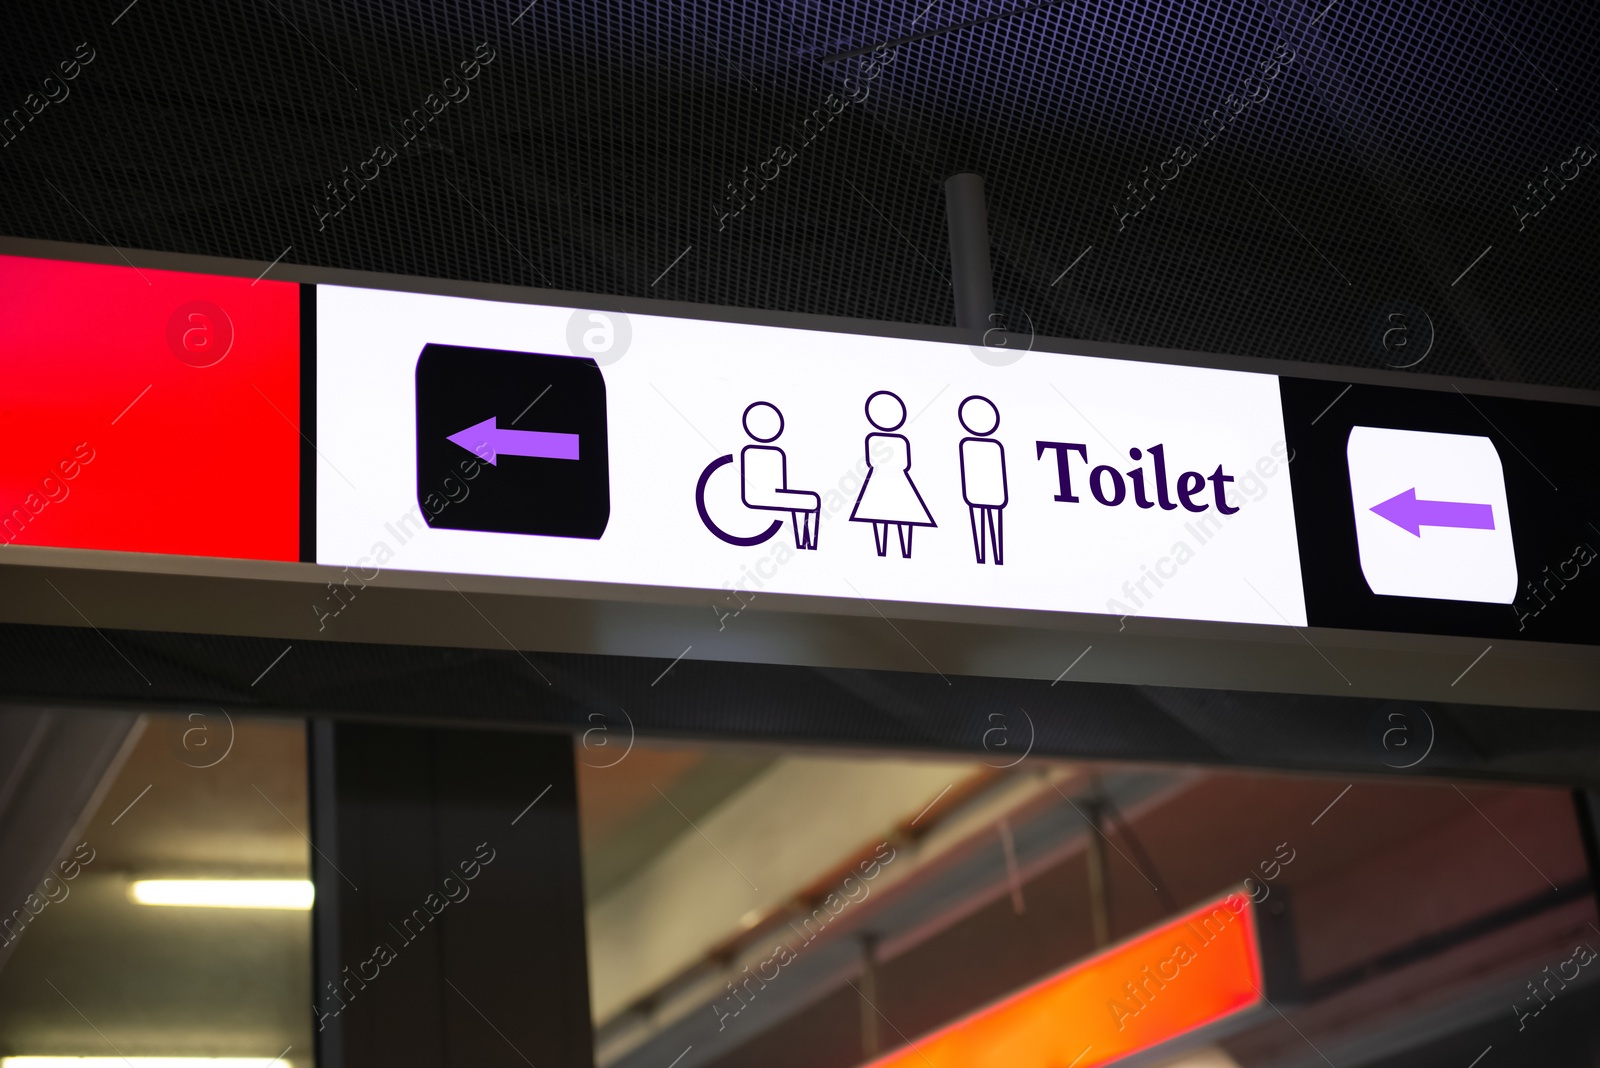 Image of Public toilet sign with symbols and arrow showing direction